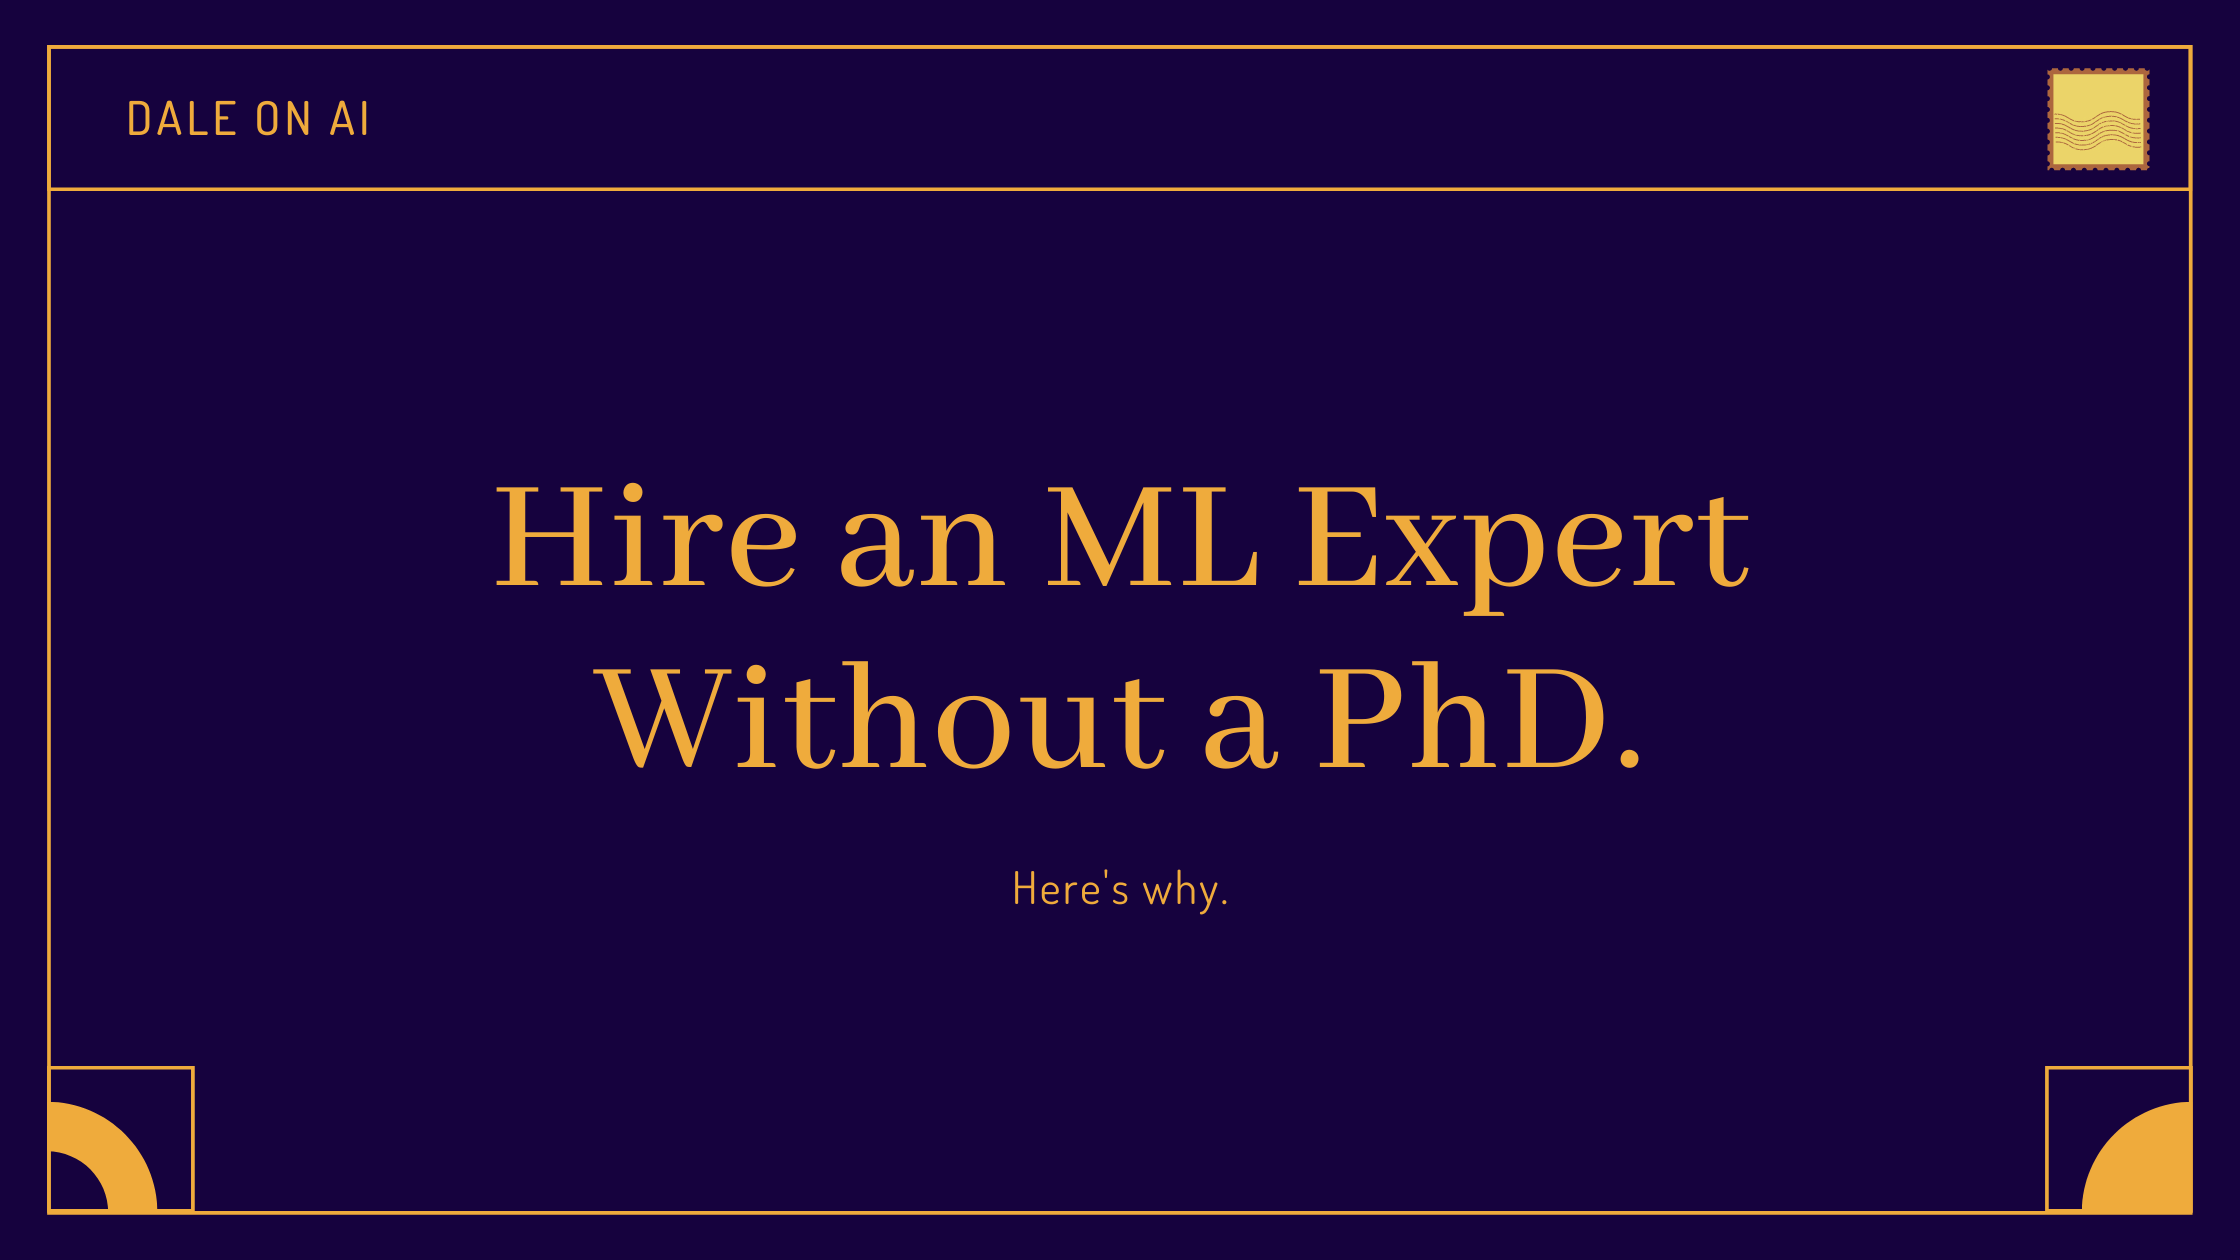 Employers: Your Machine Learning Hires Don't Need PhDs or Masters Degrees